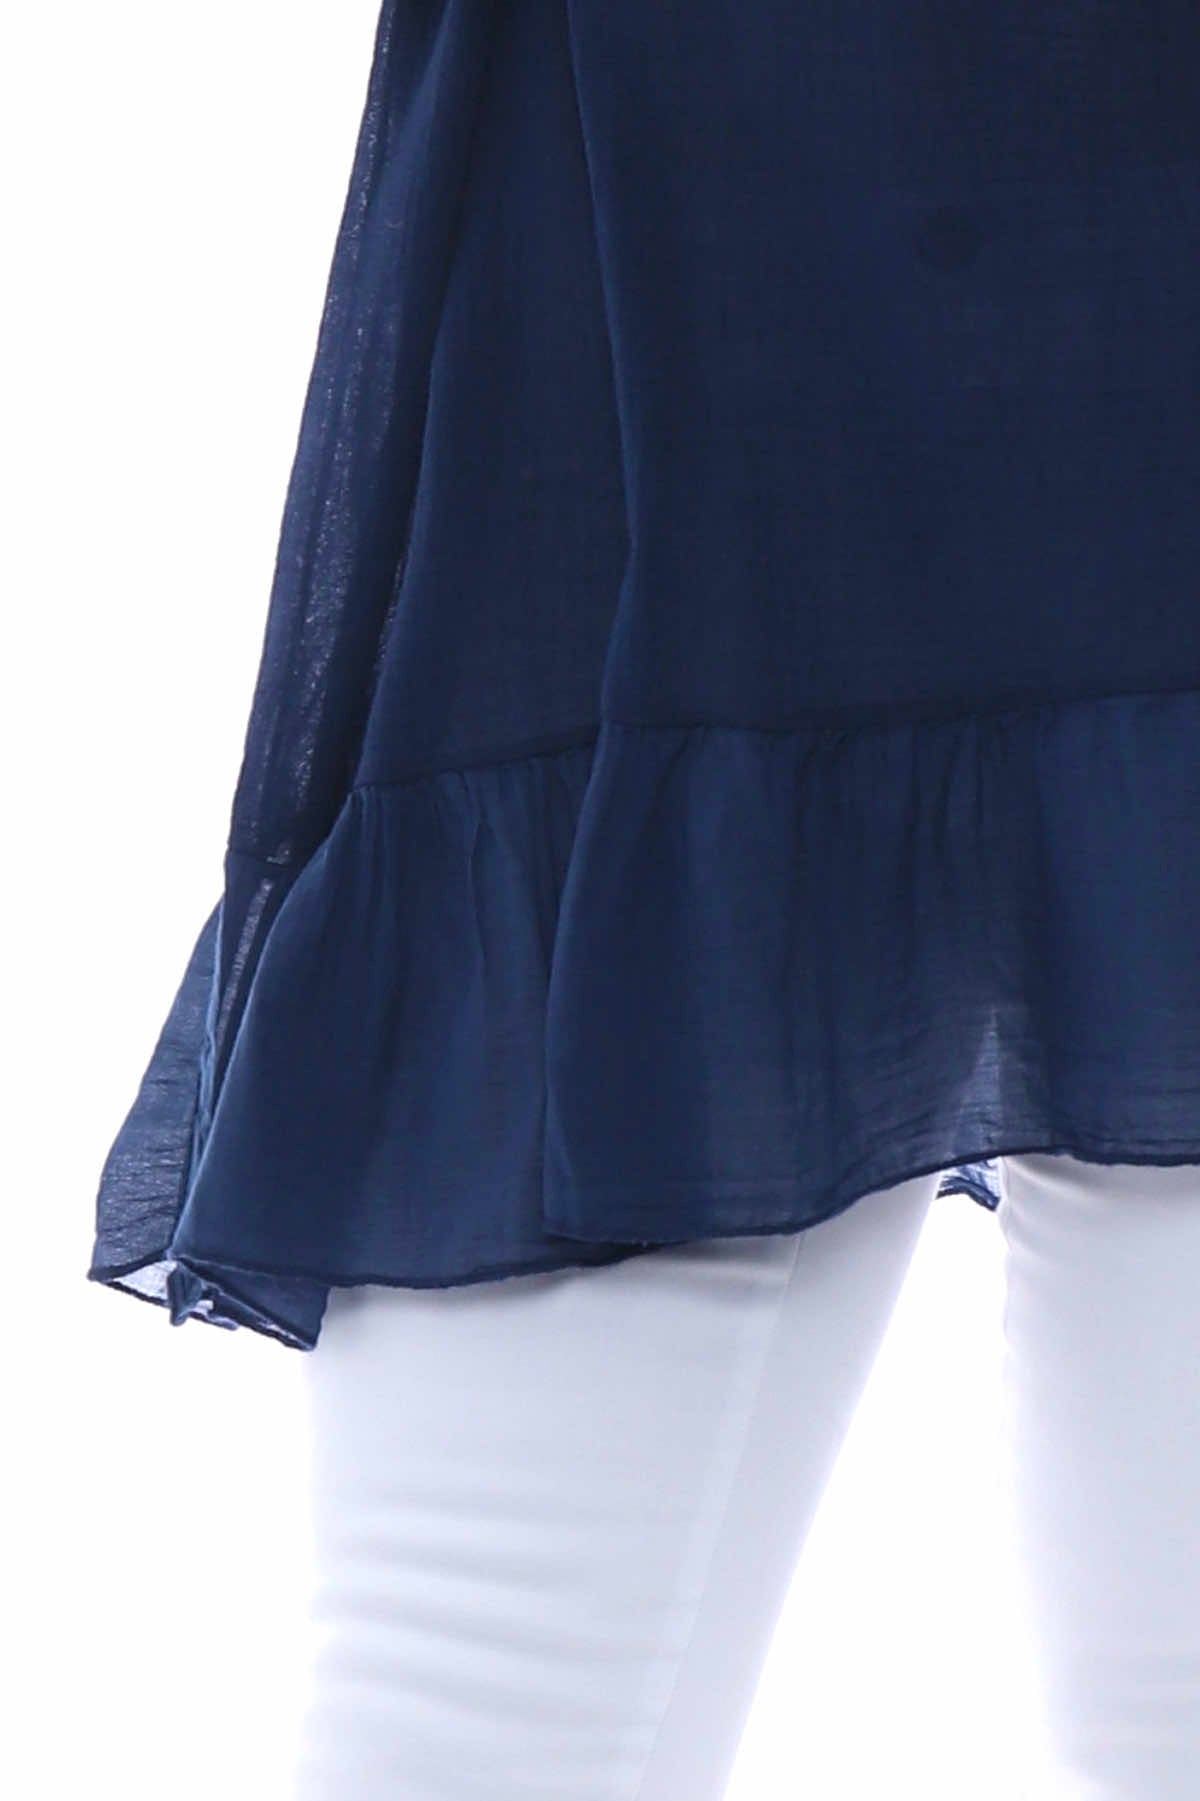 Cheyenne Frill Crinkle Cotton Top Navy